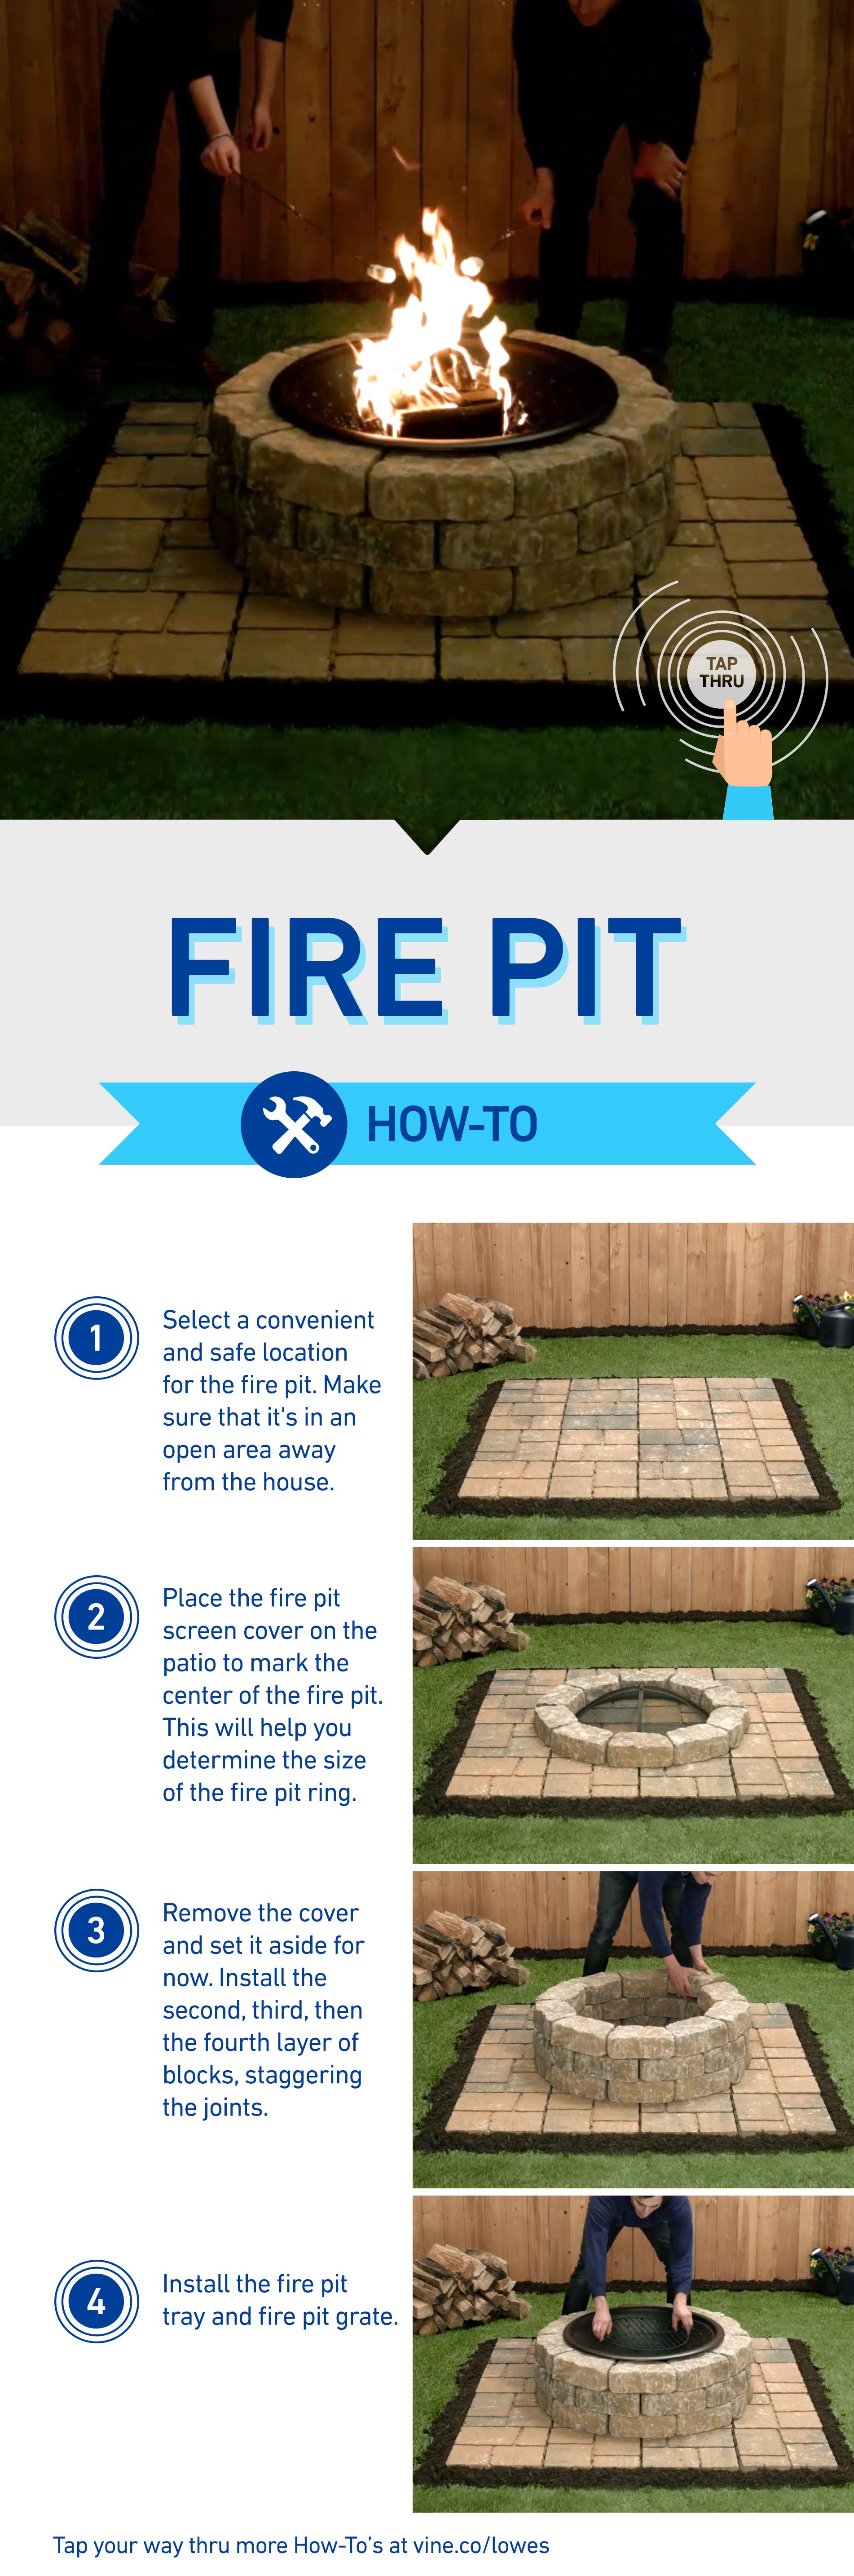 Fixing Firepit Build Challenges Troubleshooting Guide For DIY Enthusiasts